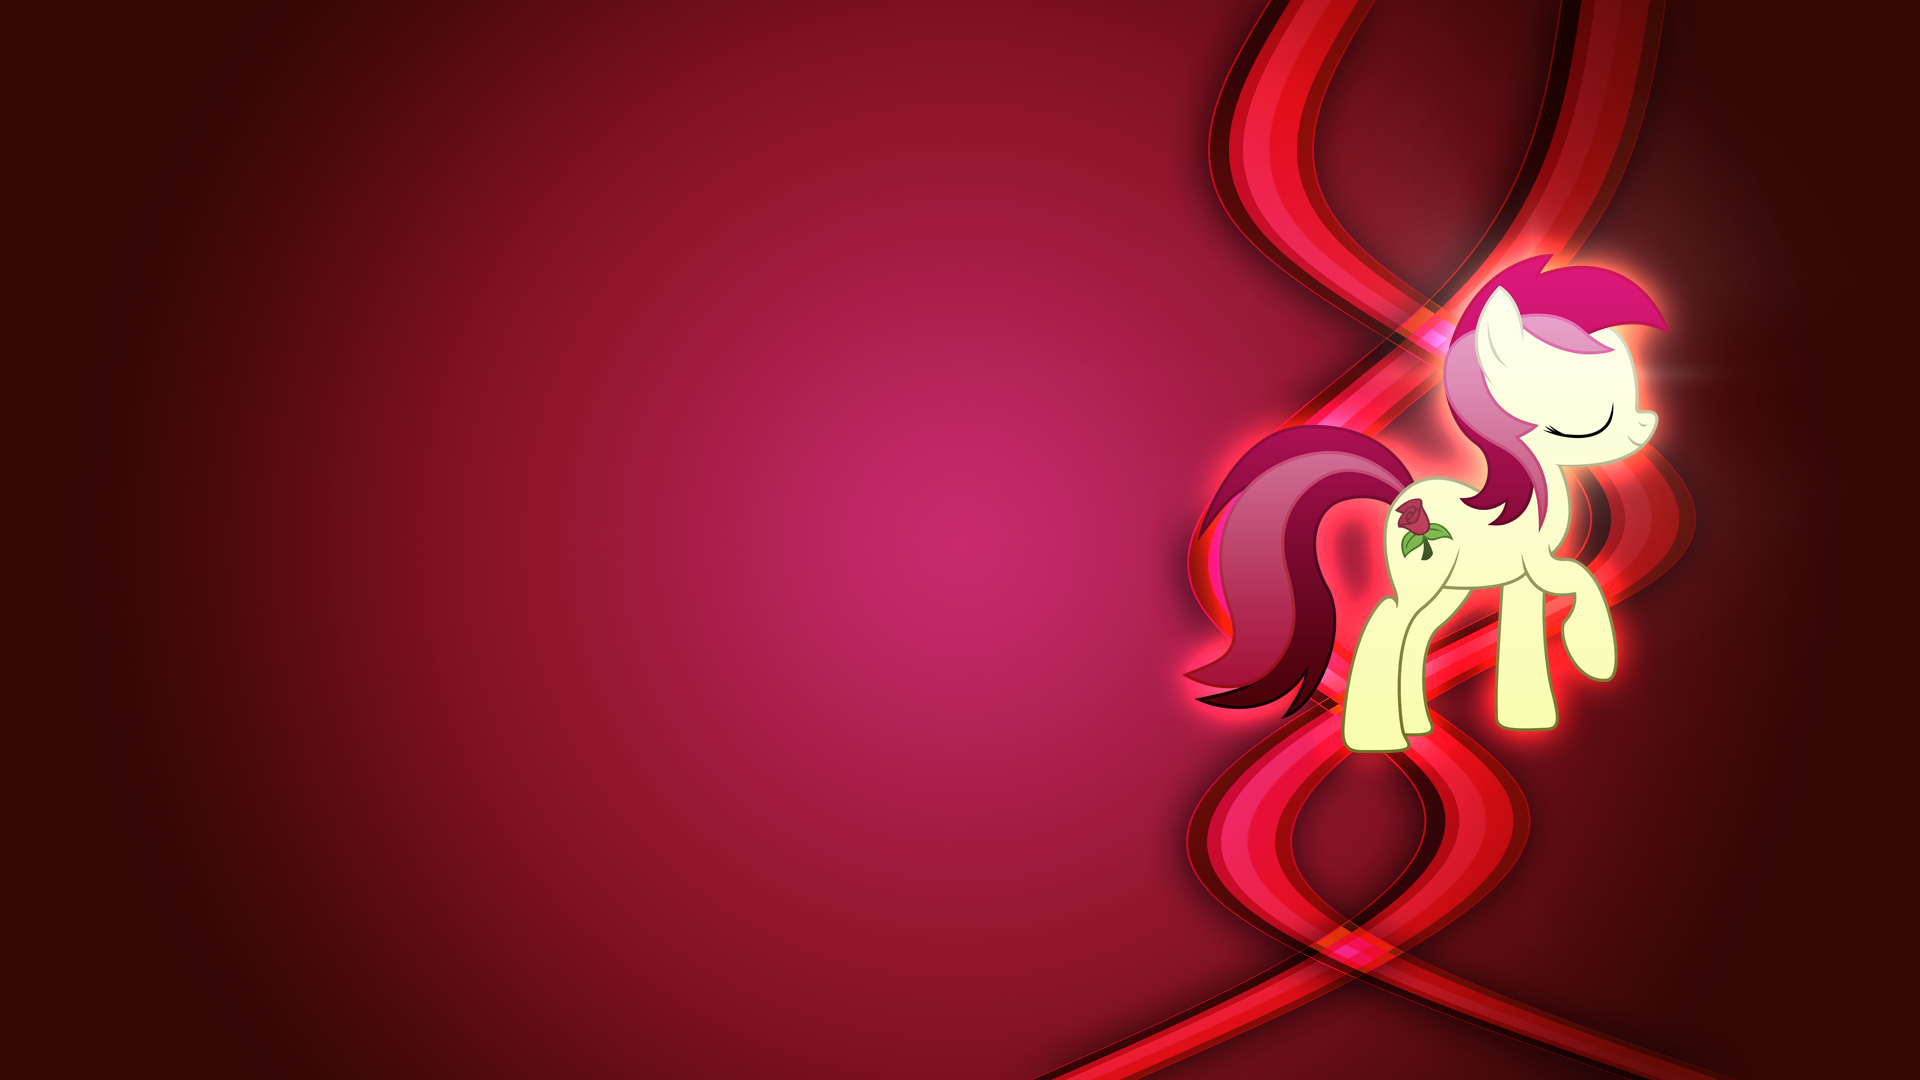 BG Characters wallpapers Part 2   Background Ponies Wallpaper